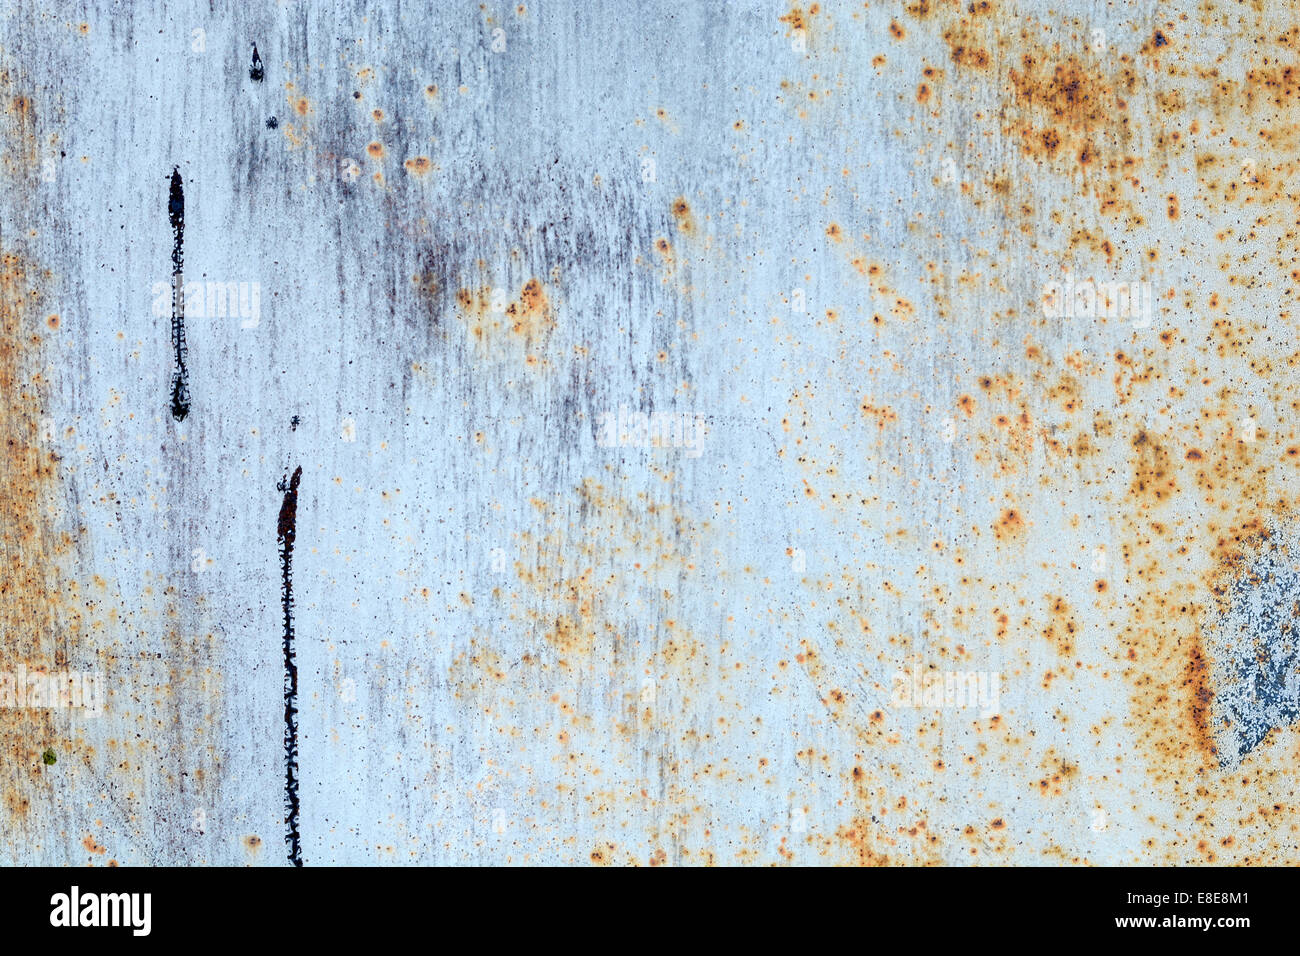 scratched ripped metal plating, grunge background Stock Photo